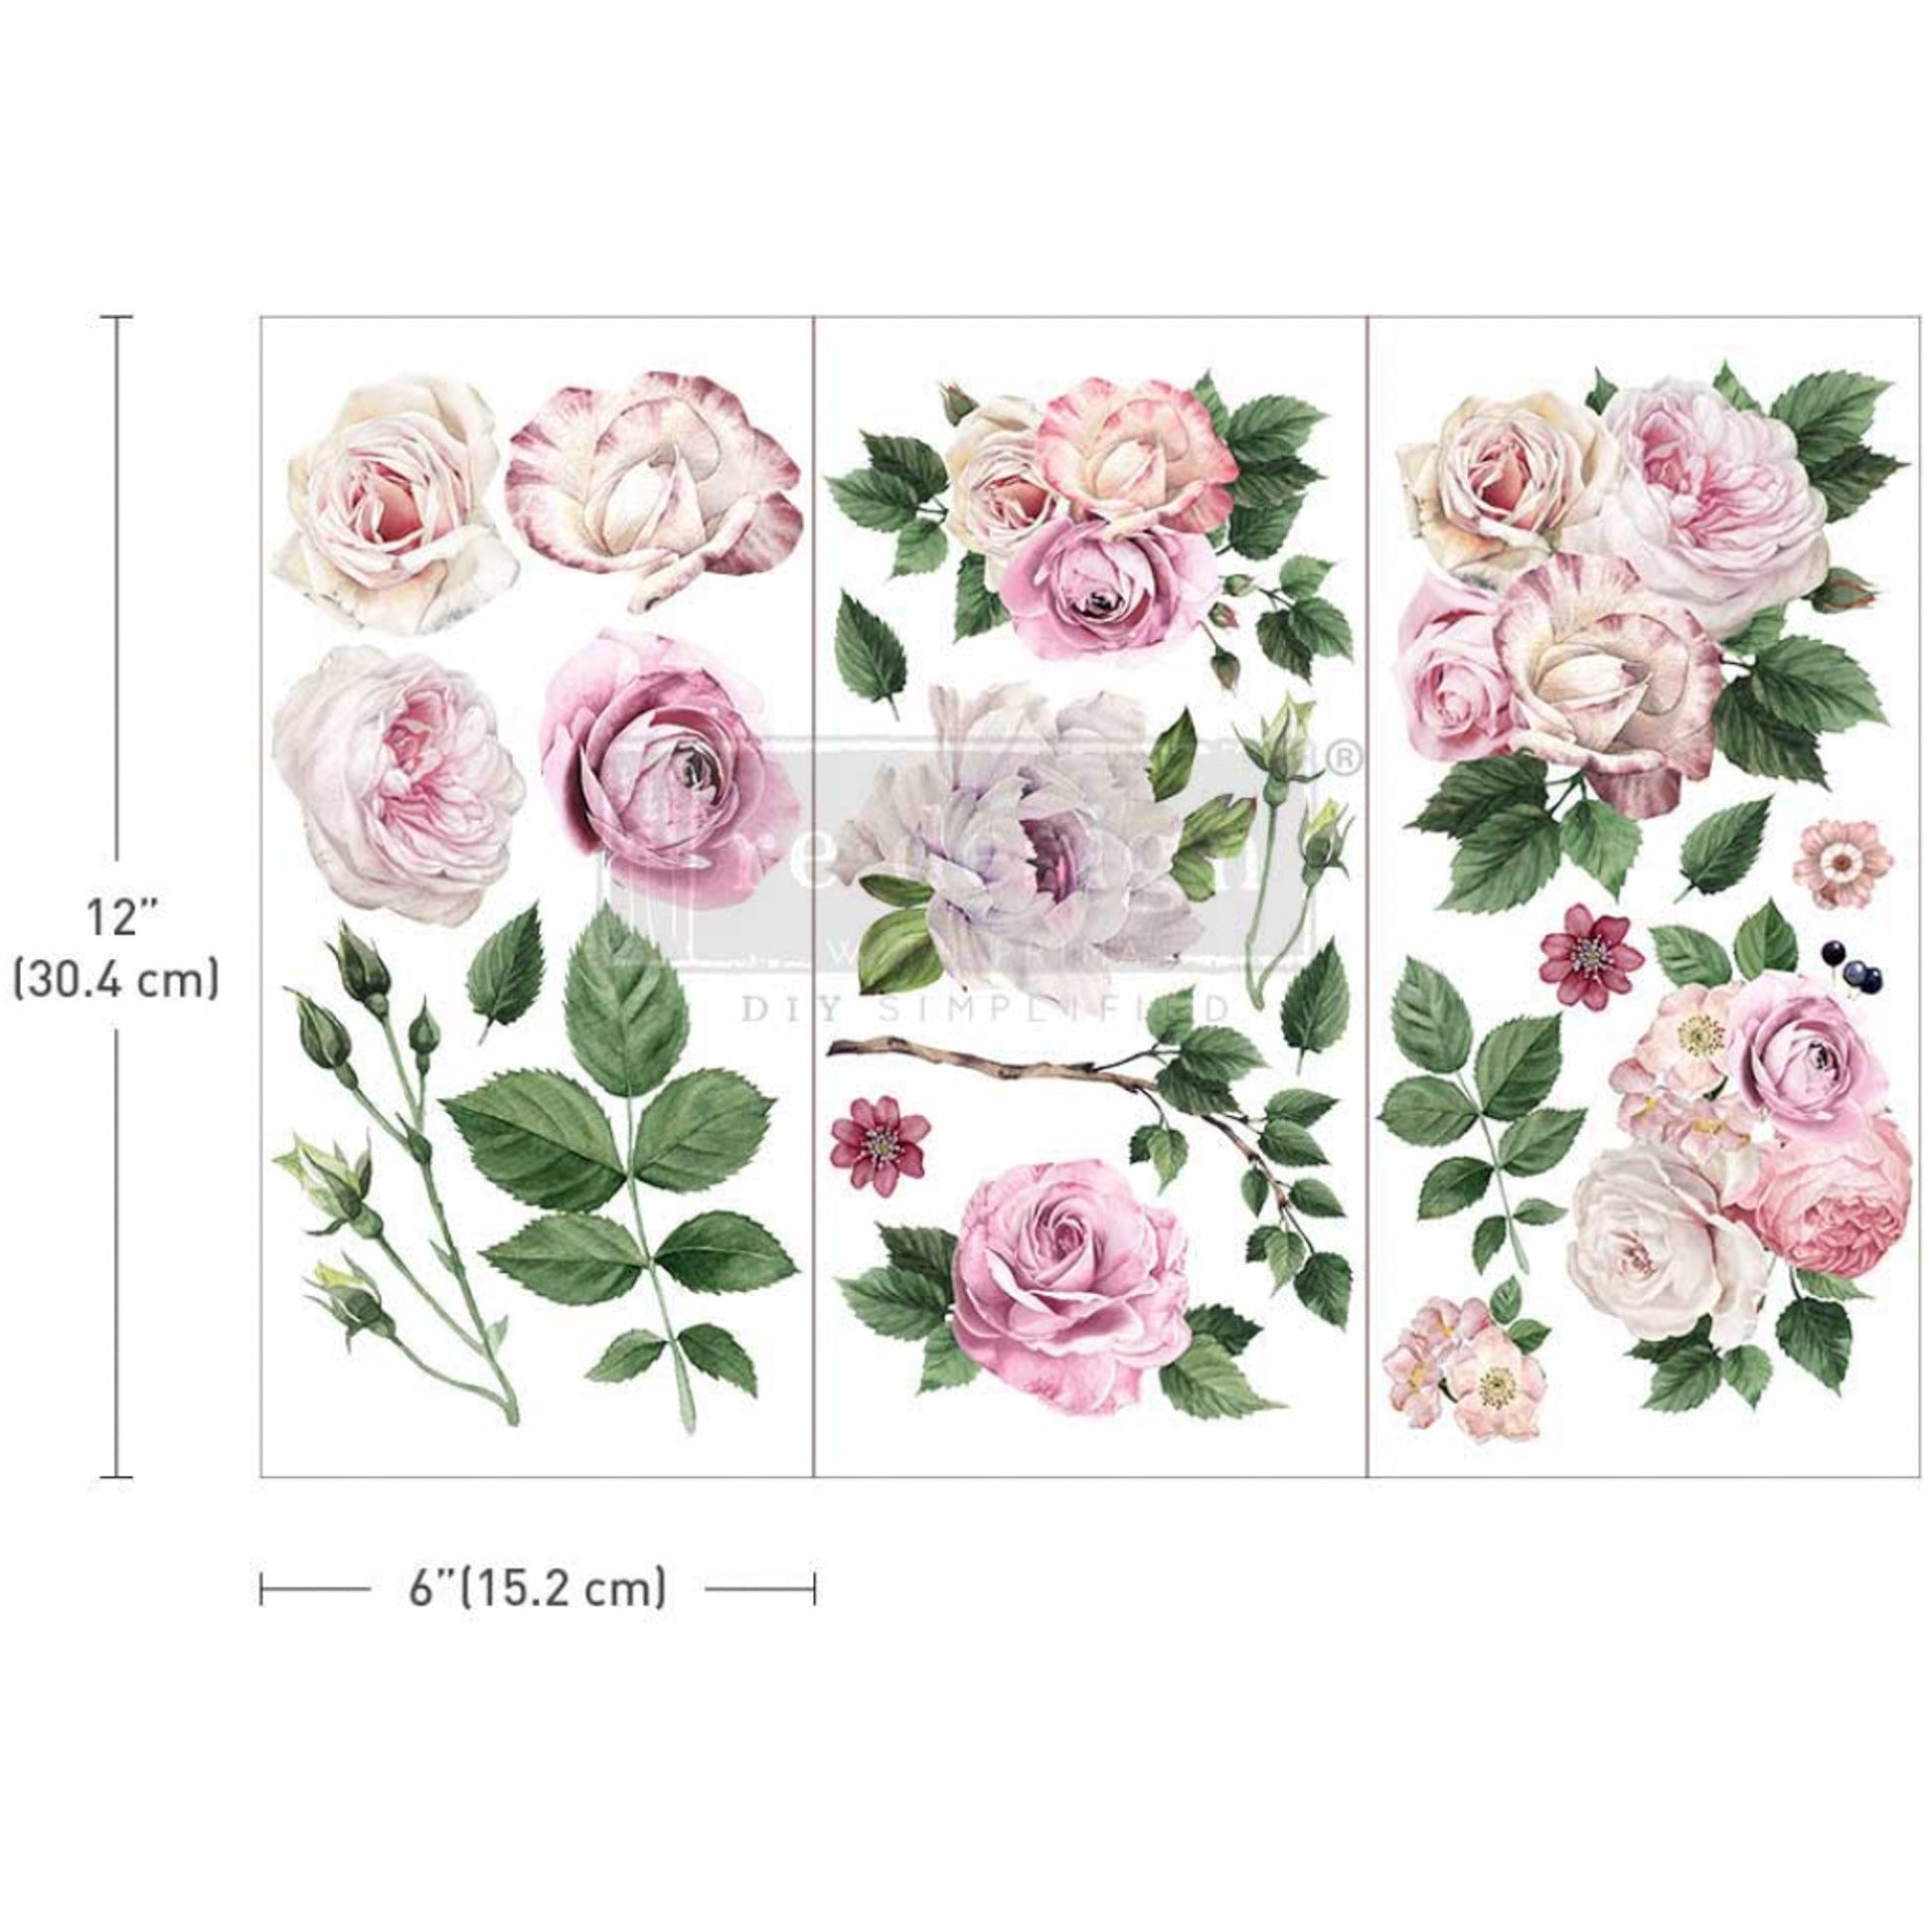 Three sheets of ReDesign with Prima's Delicate Roses small transfer are on a white background. Measurements for 1 sheet reads: 12" [30.4 cm] by 12" [30.4 cm].